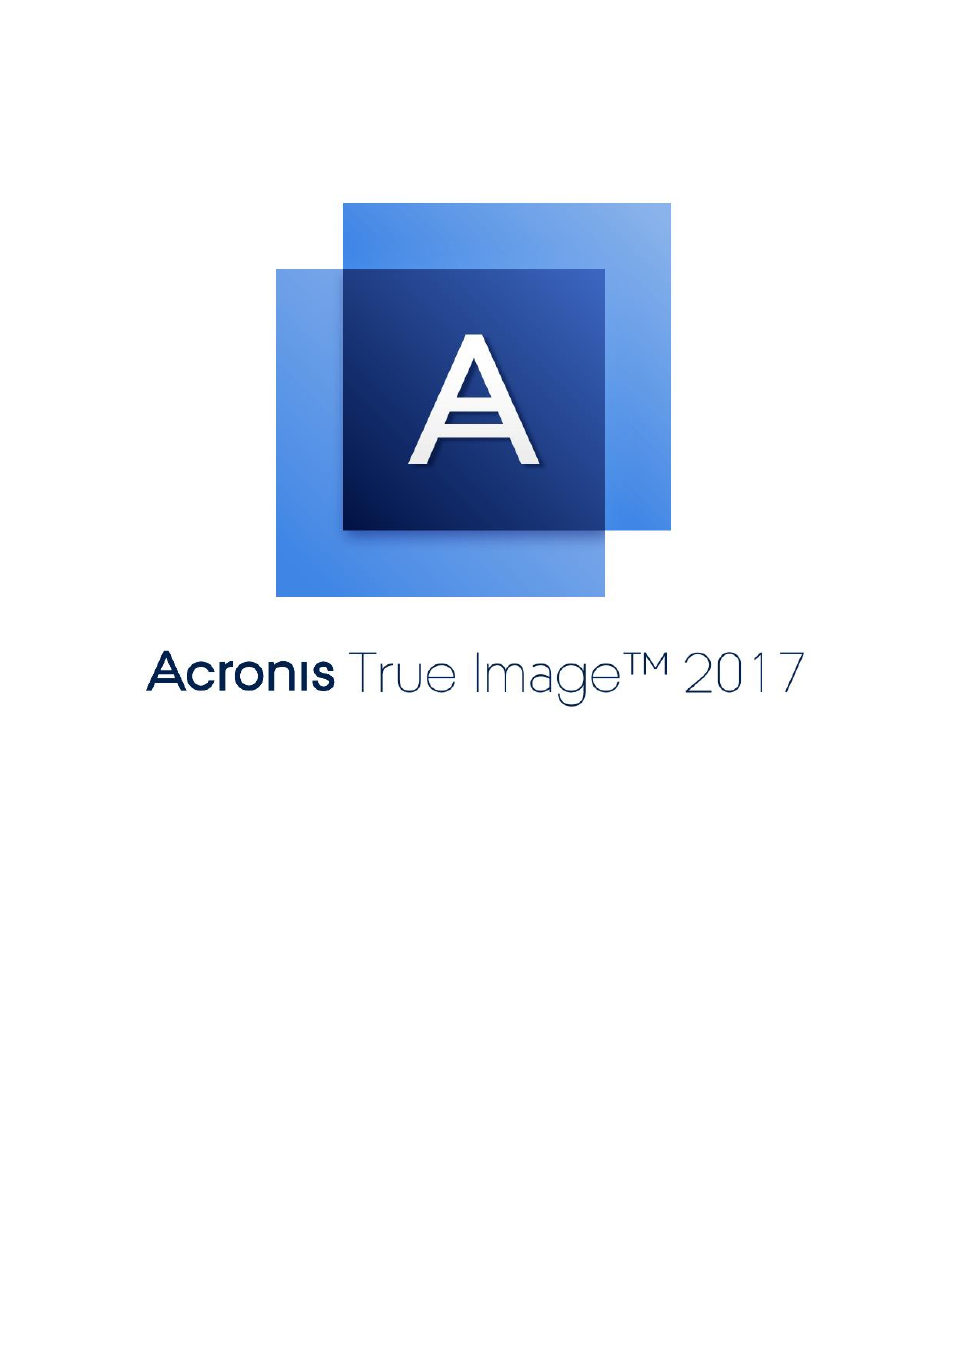 Acronis True Image 2017 NG Manuale d'uso | Pagine: 47